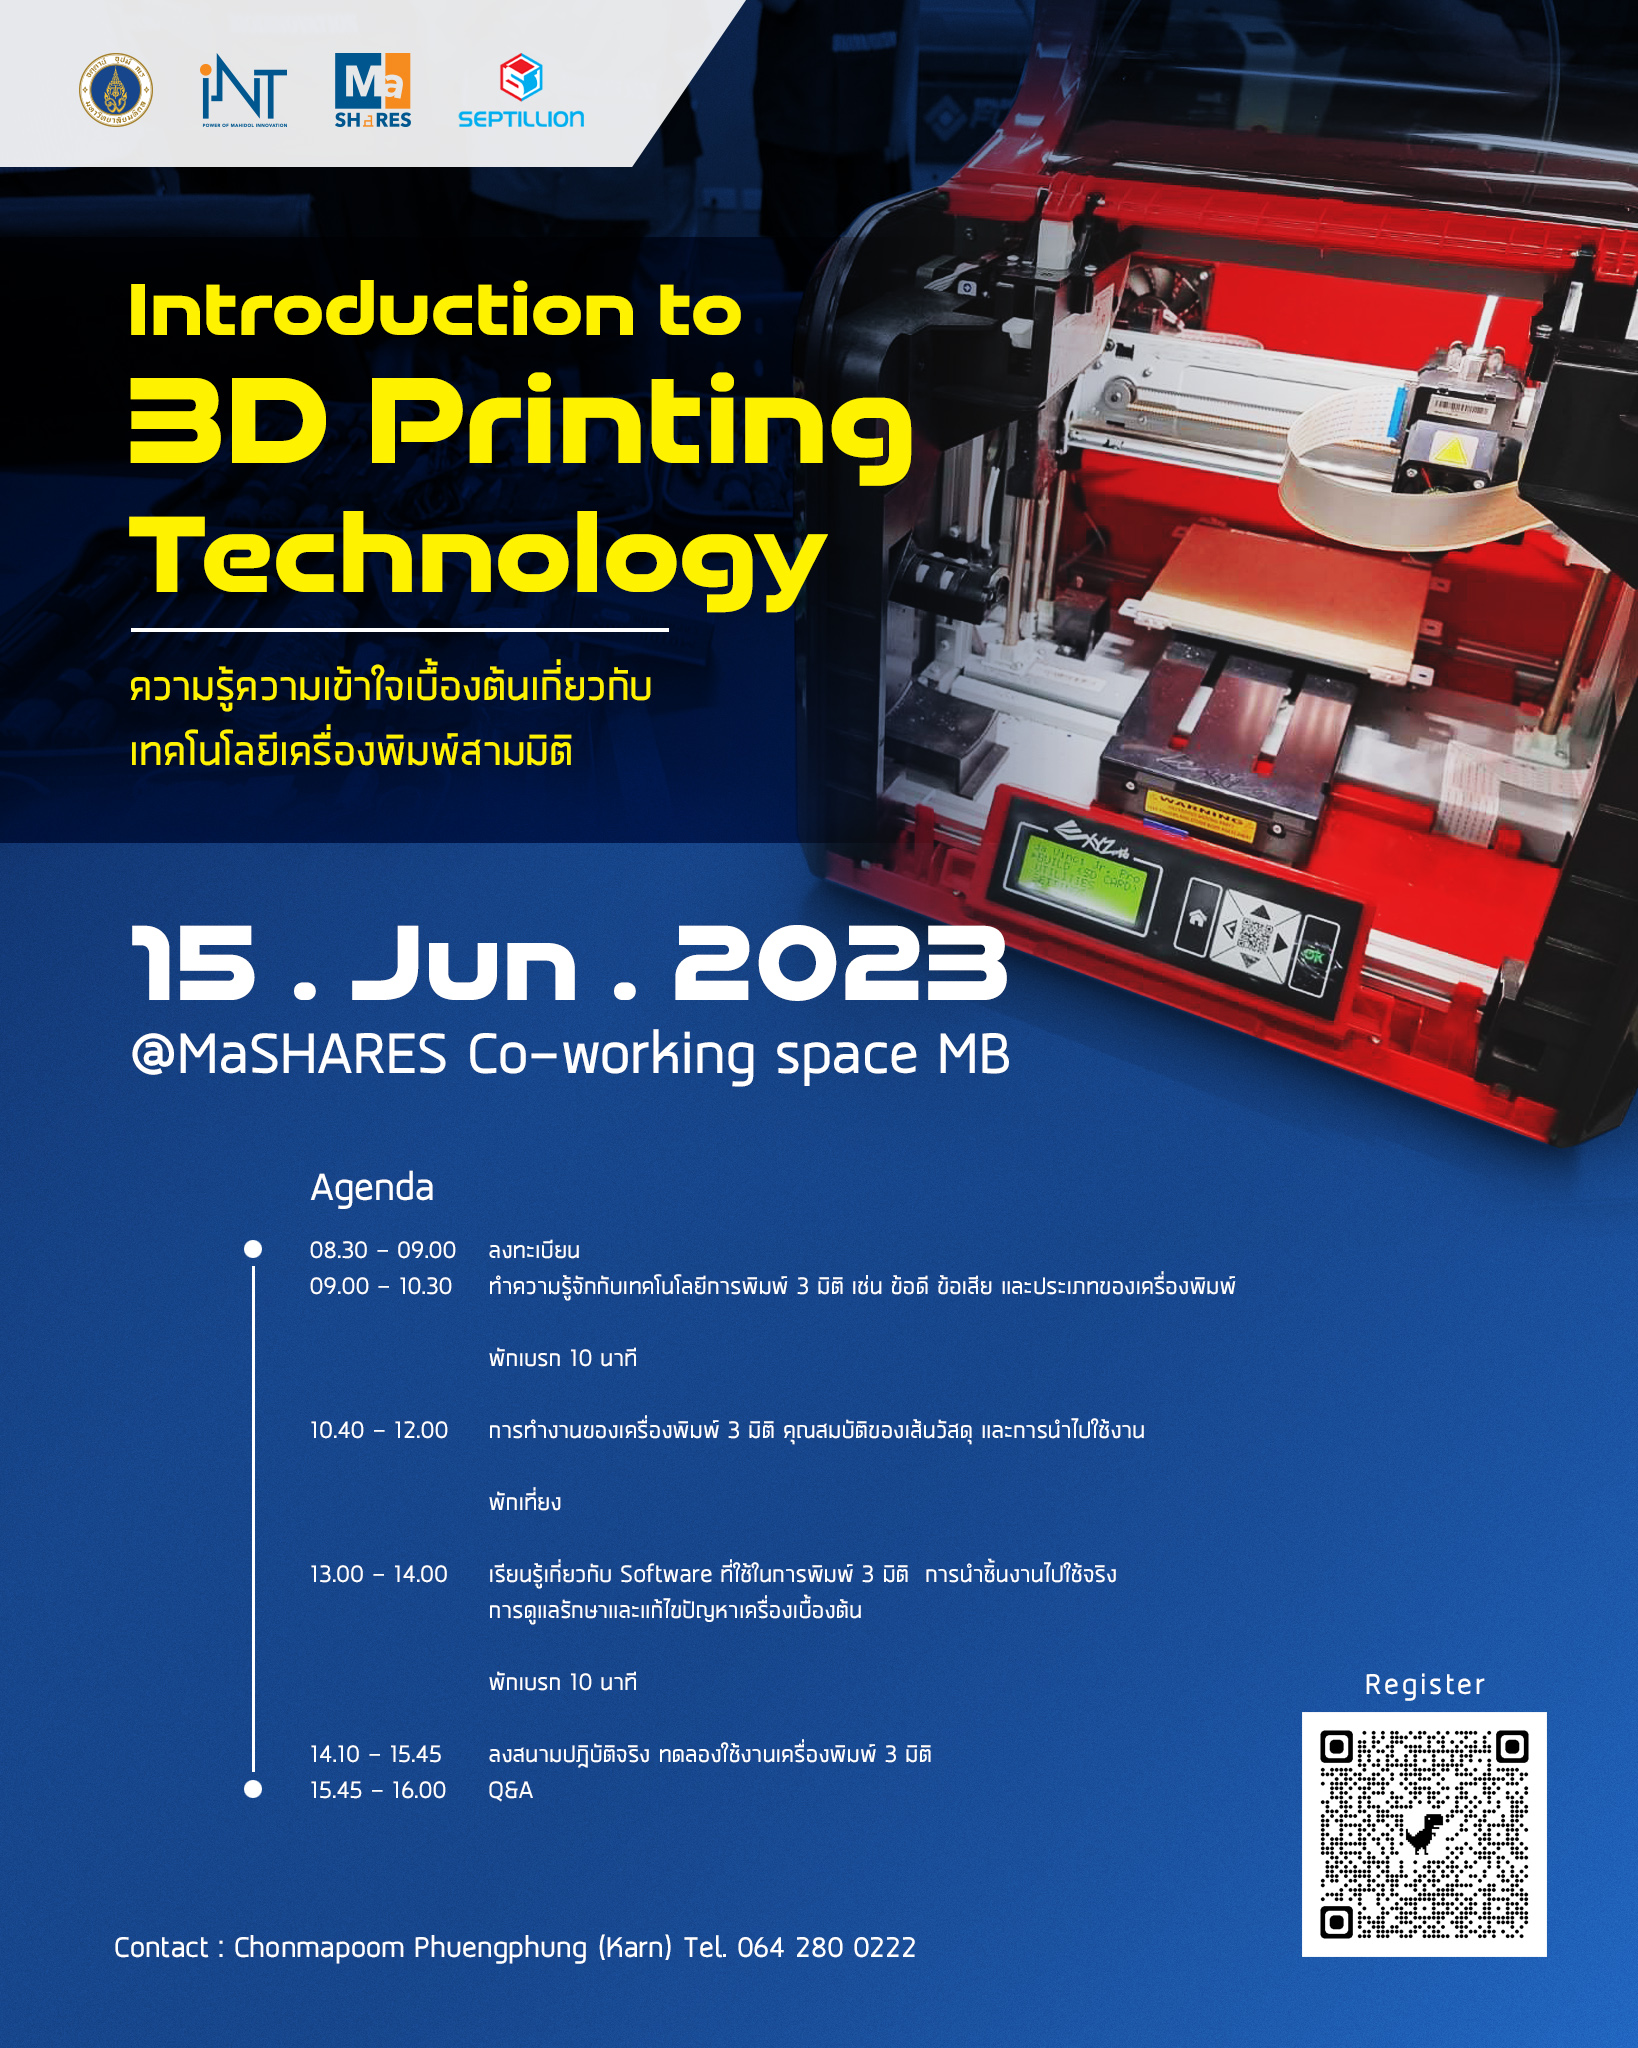 Introduction to 3D Printing Technology 4th